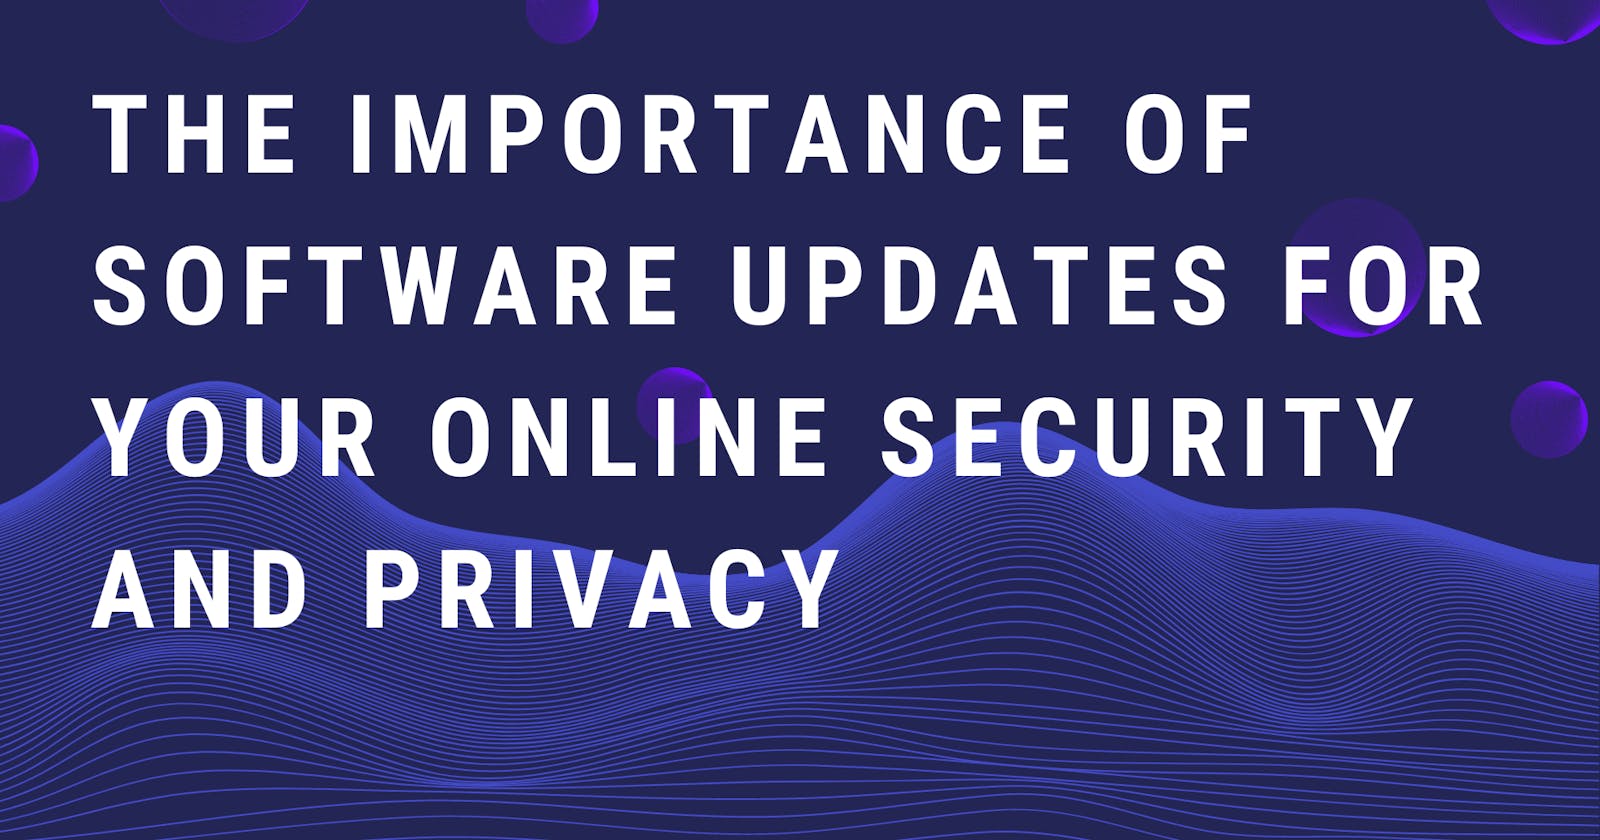 The Importance of Software Updates for Your Online Security and Privacy